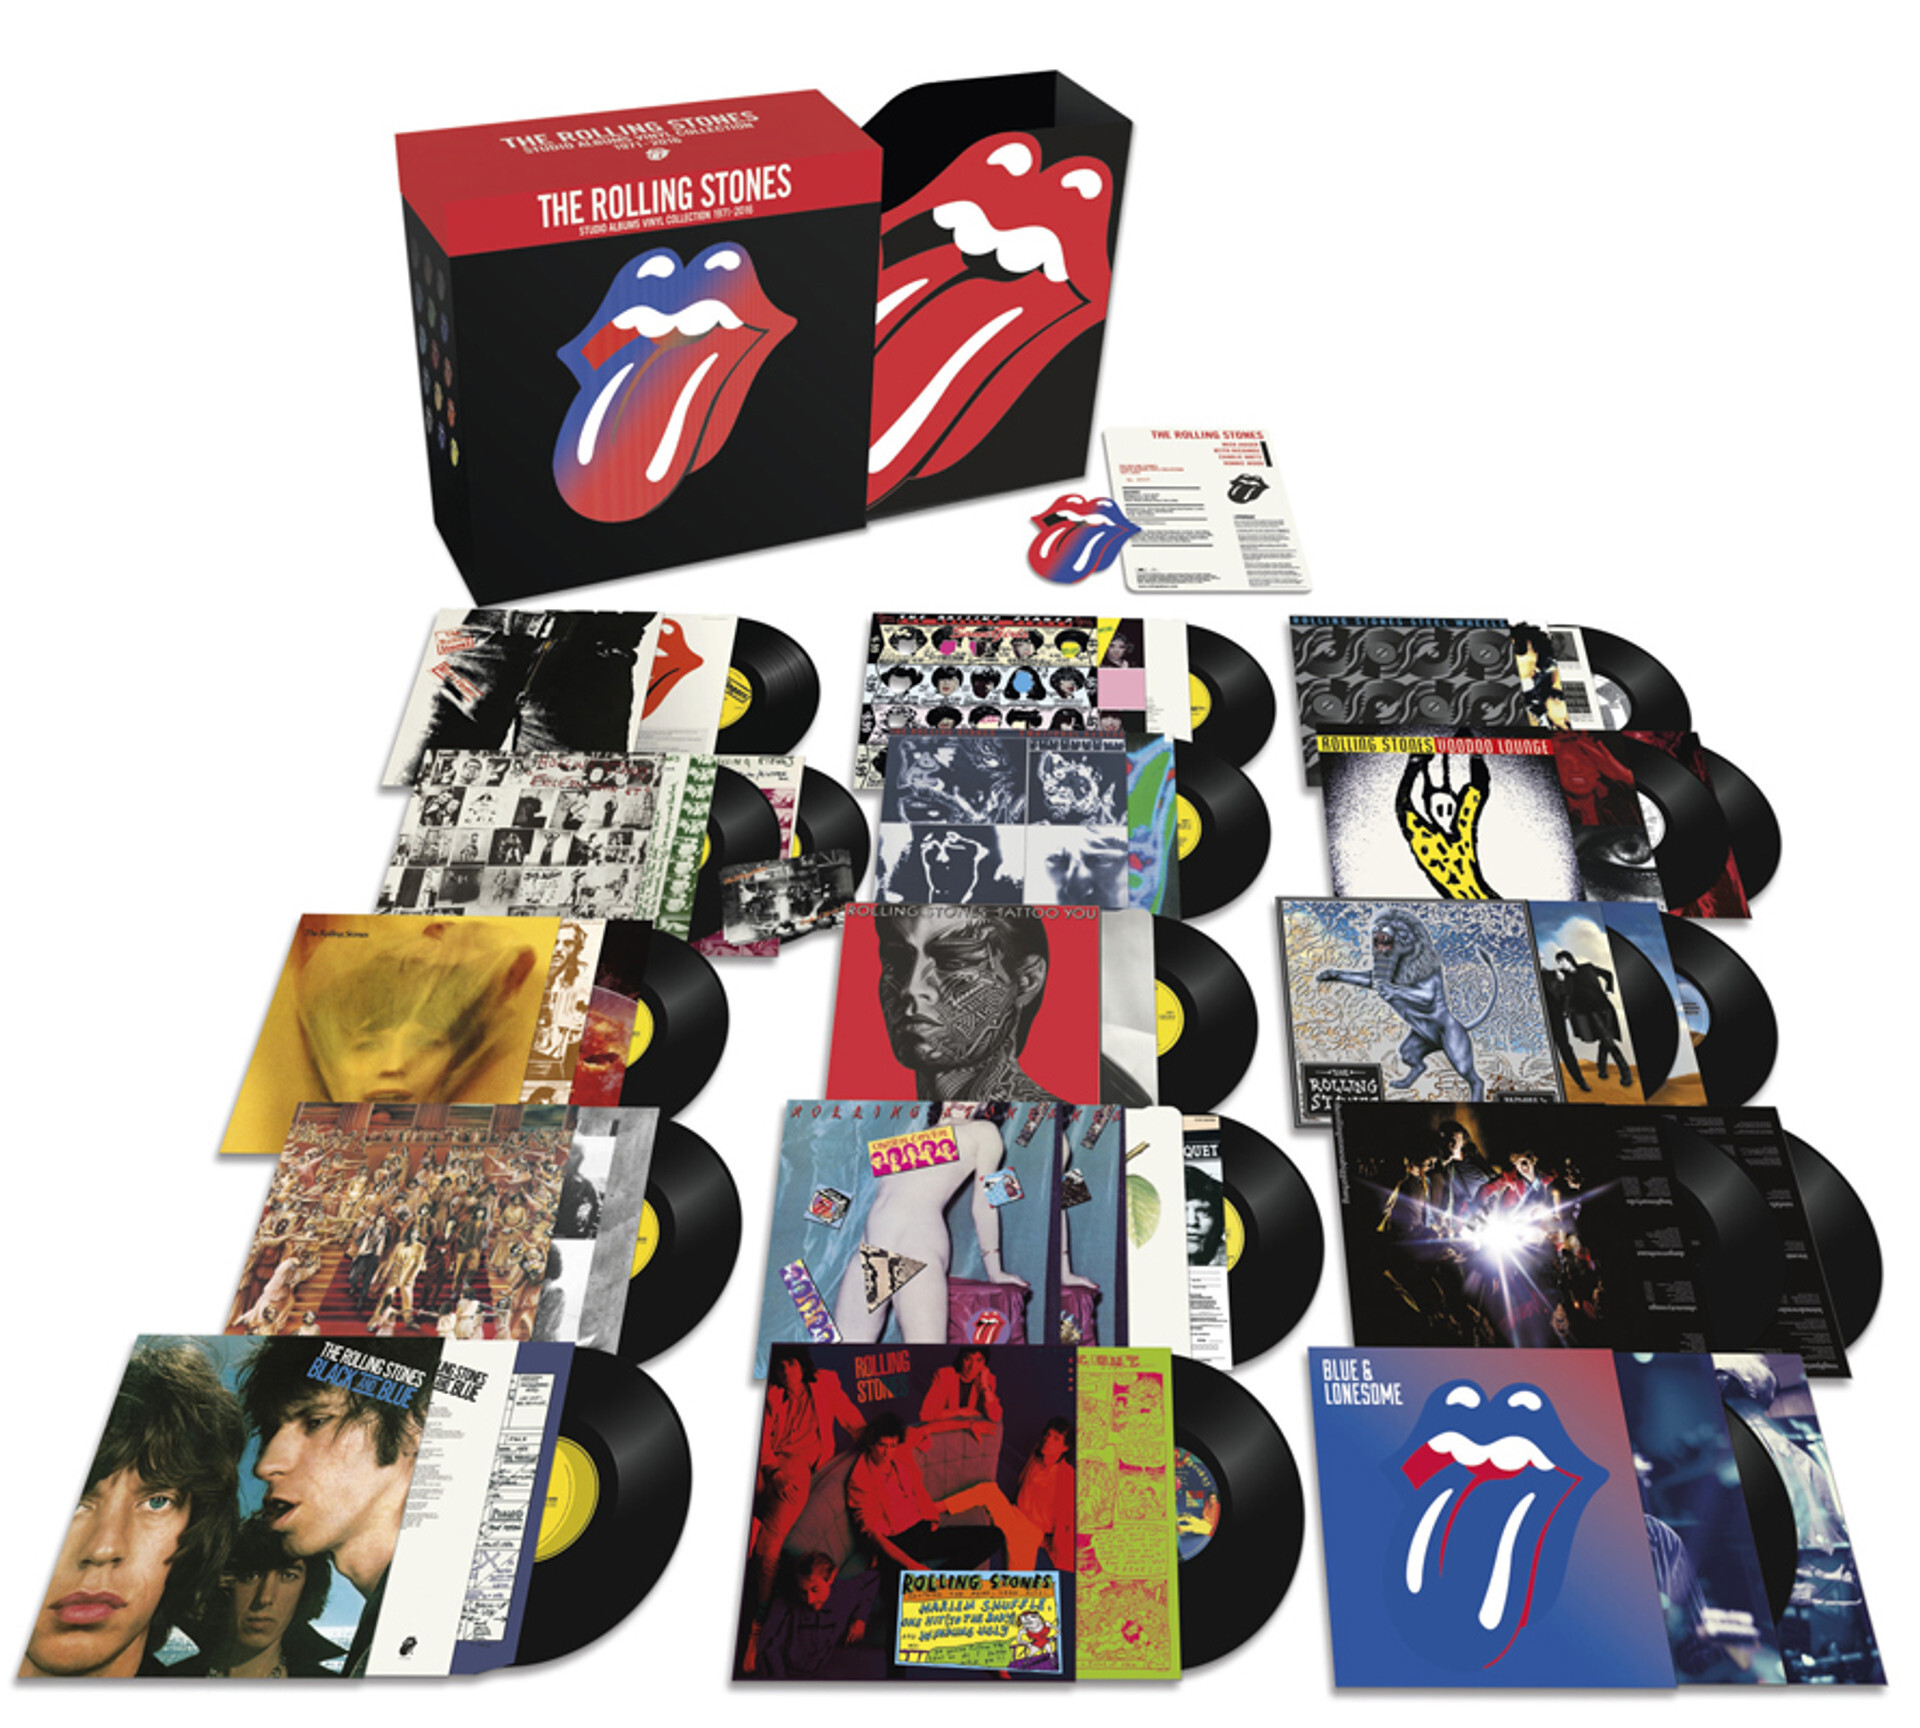 The Rolling Stones Studio Albums Vinyl Collection 1971-2016 Numbered Limited Edition Half-Speed Mastered 180g 20LP